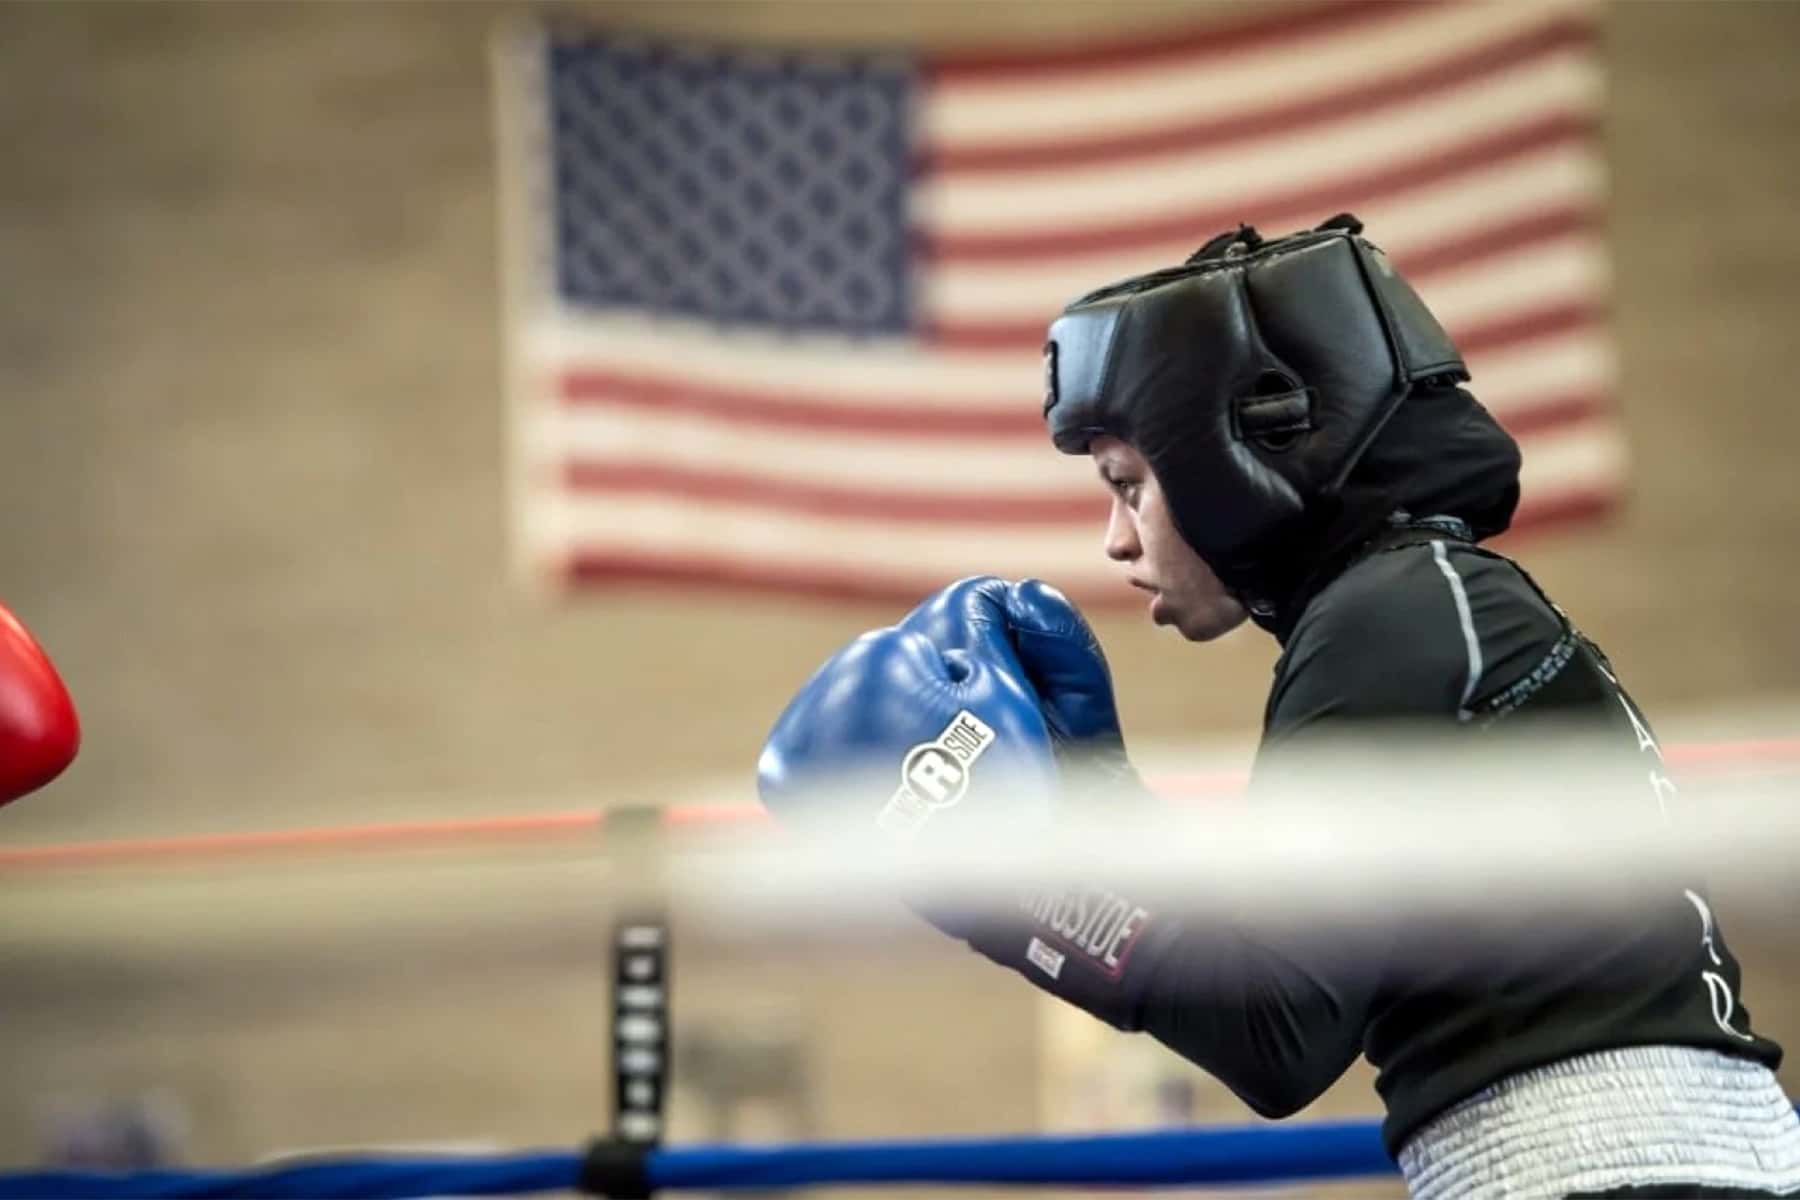 New Rule Change For Female Boxing Uniform Allows Muslim Women To